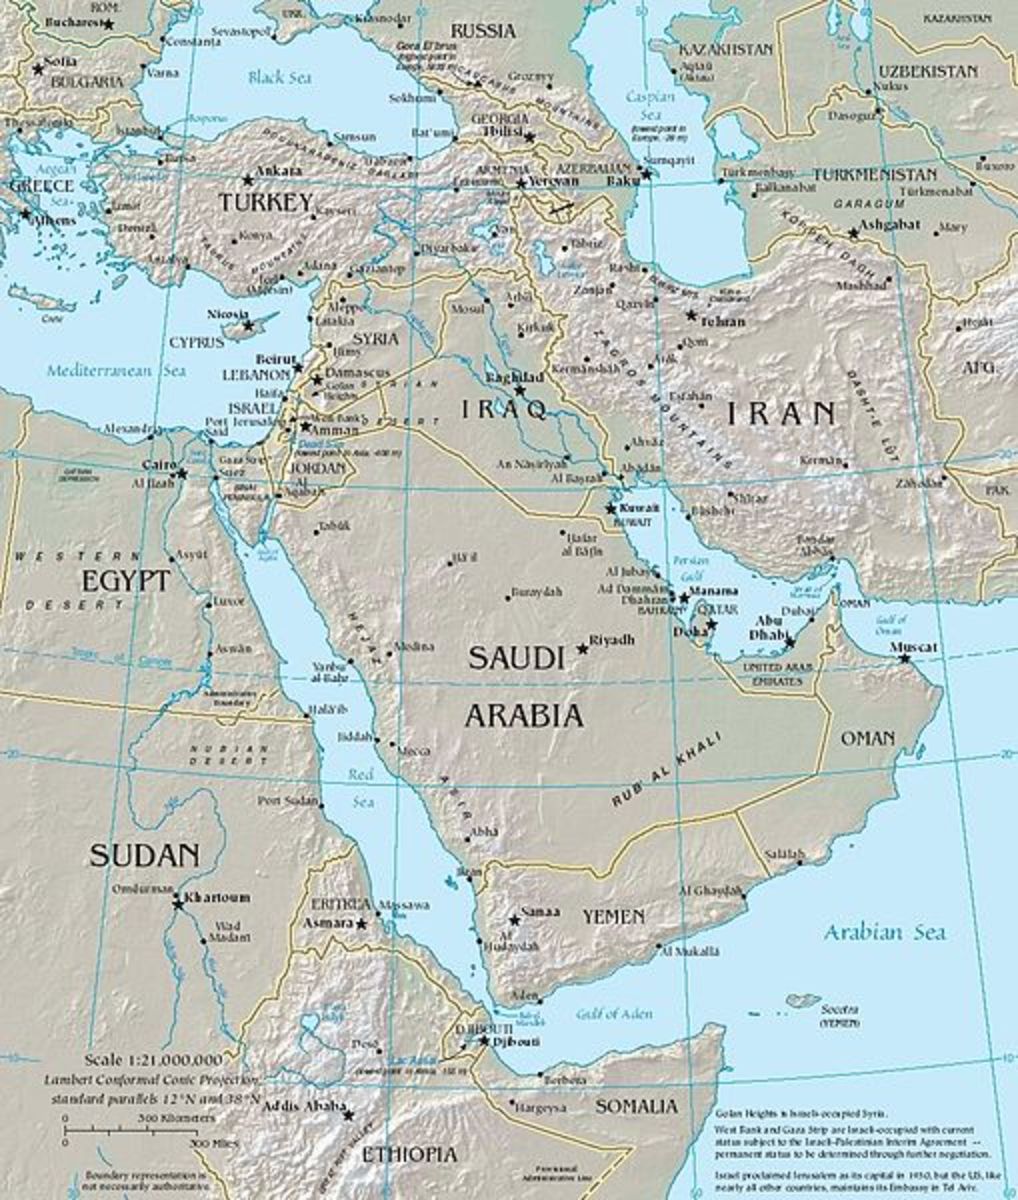 The traditional Middle East